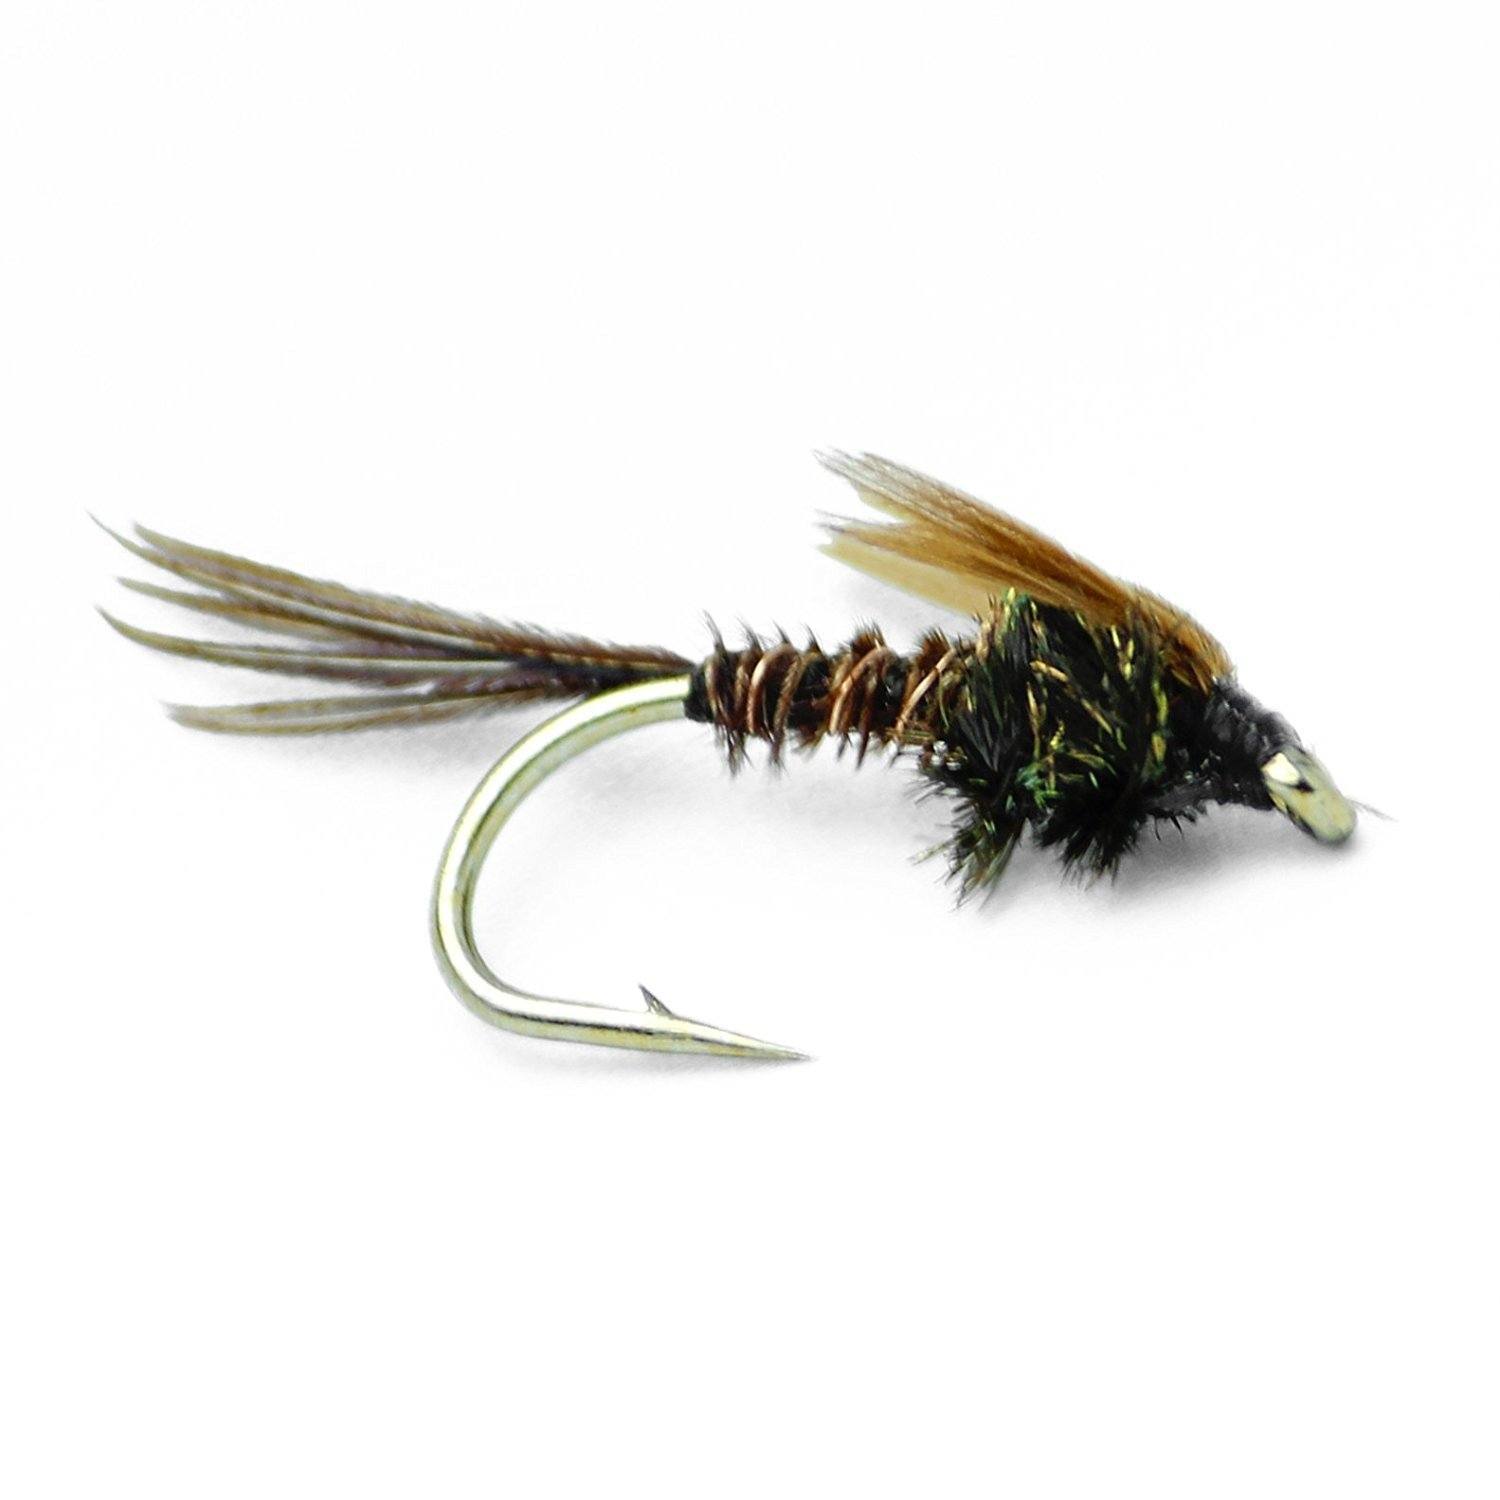 Psycho Caddis Dry Fly for Top Water Fly Fishing